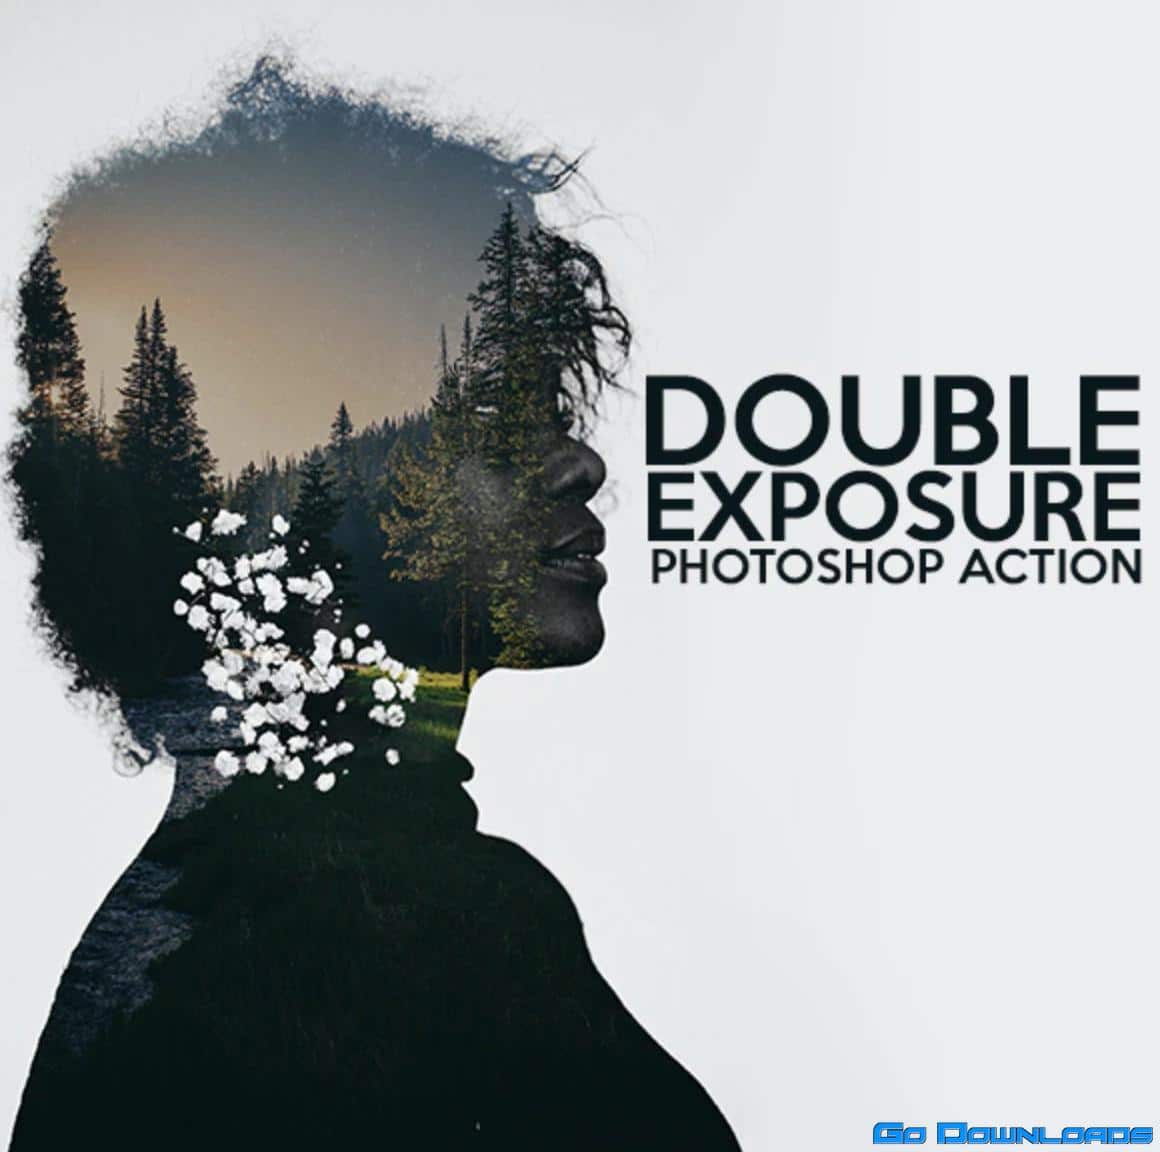 GraphicRiver – Double Exposure – Photoshop Action 29373947 Free Download